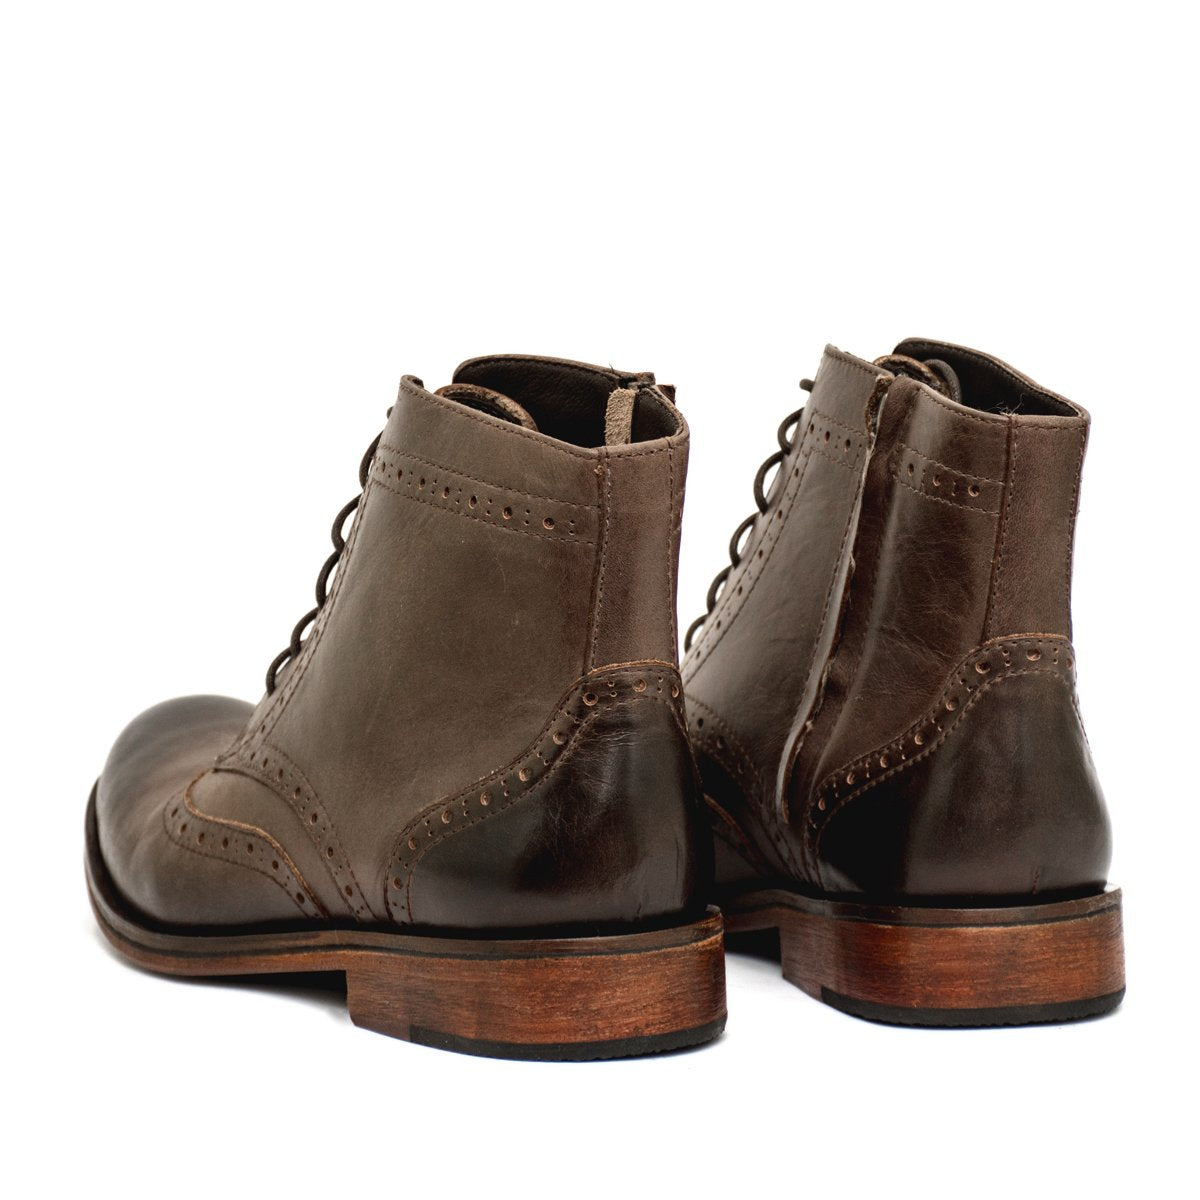 Urbano Frank - leather boots – CAPITA Boots and Shoes